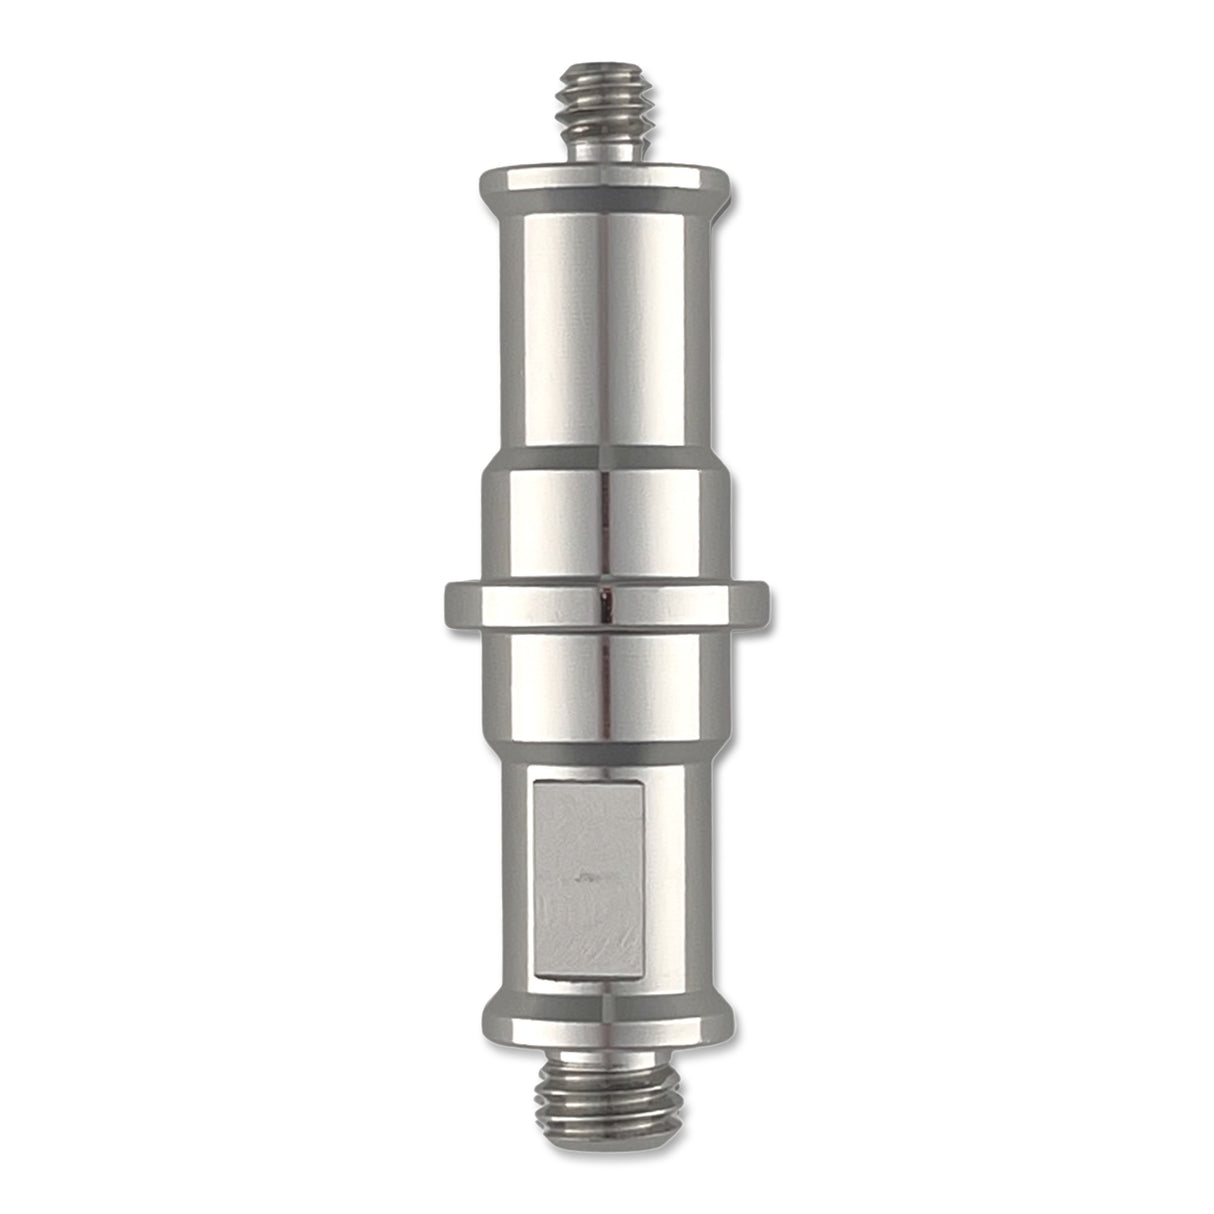 Spigot Stud with 1/4-20 and 3/8 threads, dual flat sides